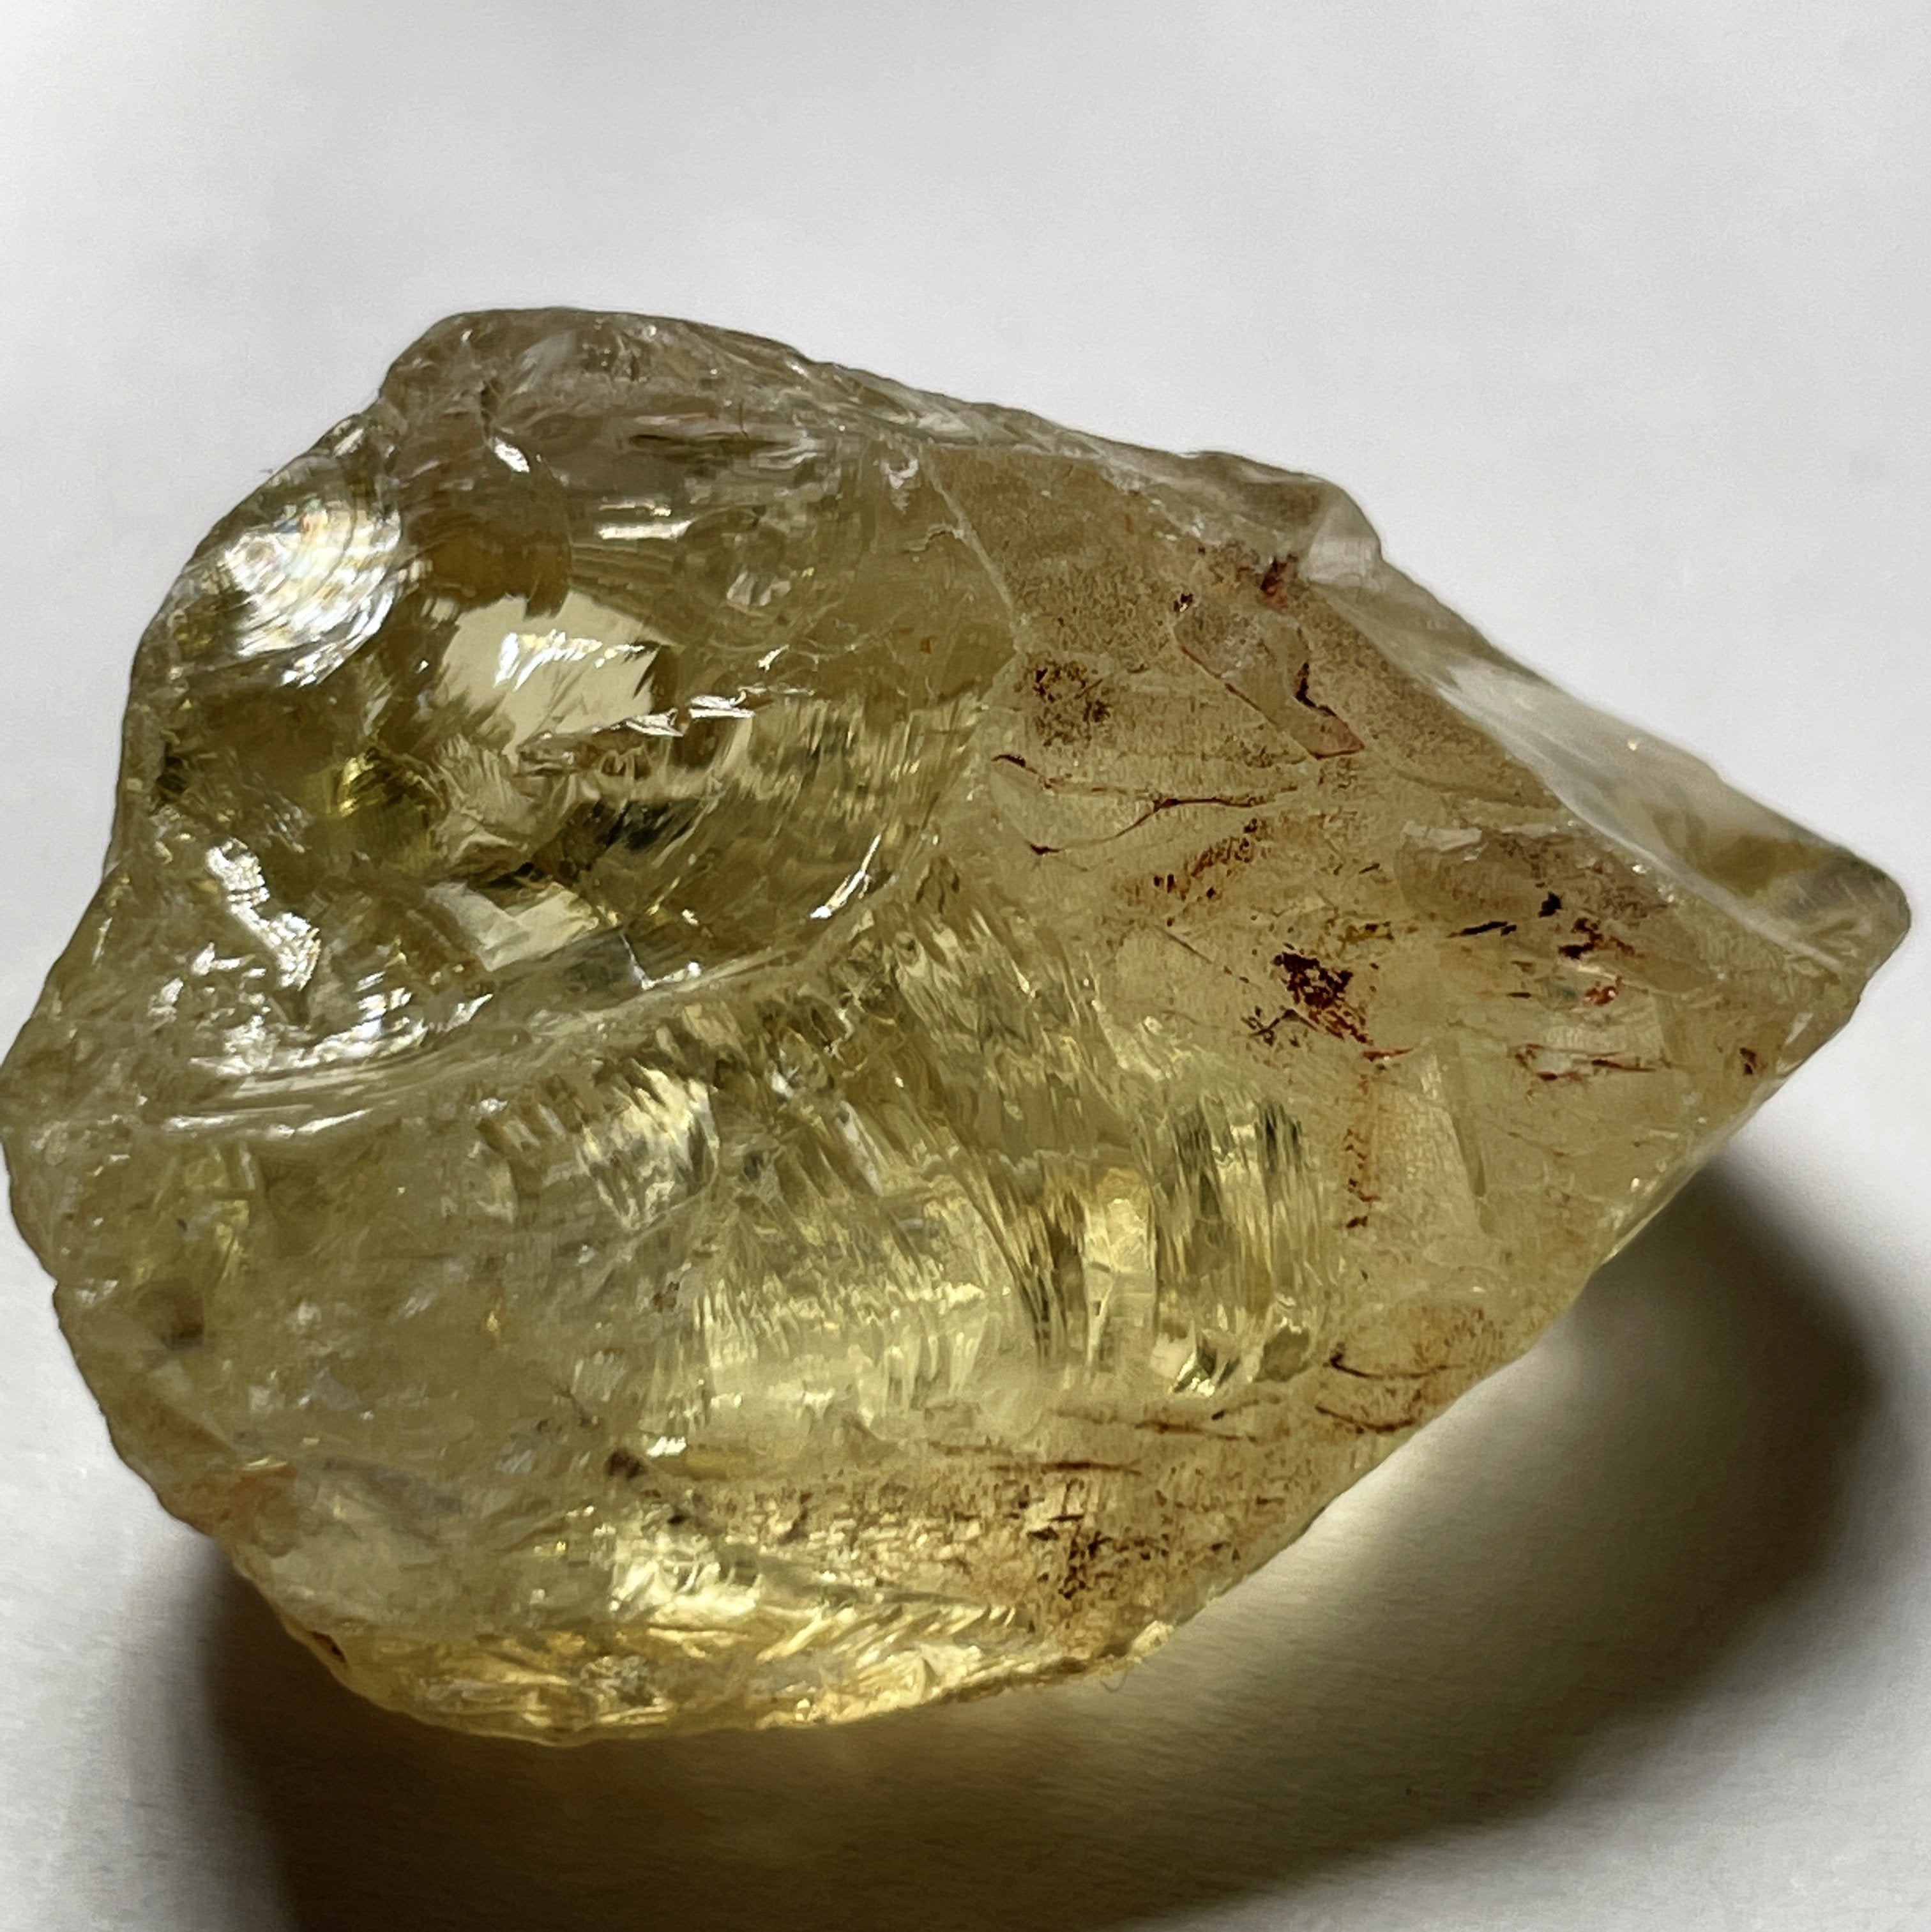 17.59Gm Citrine Zambia. Untreated Unheated. Rare As Not Heated From Amethyst Natural Colour.